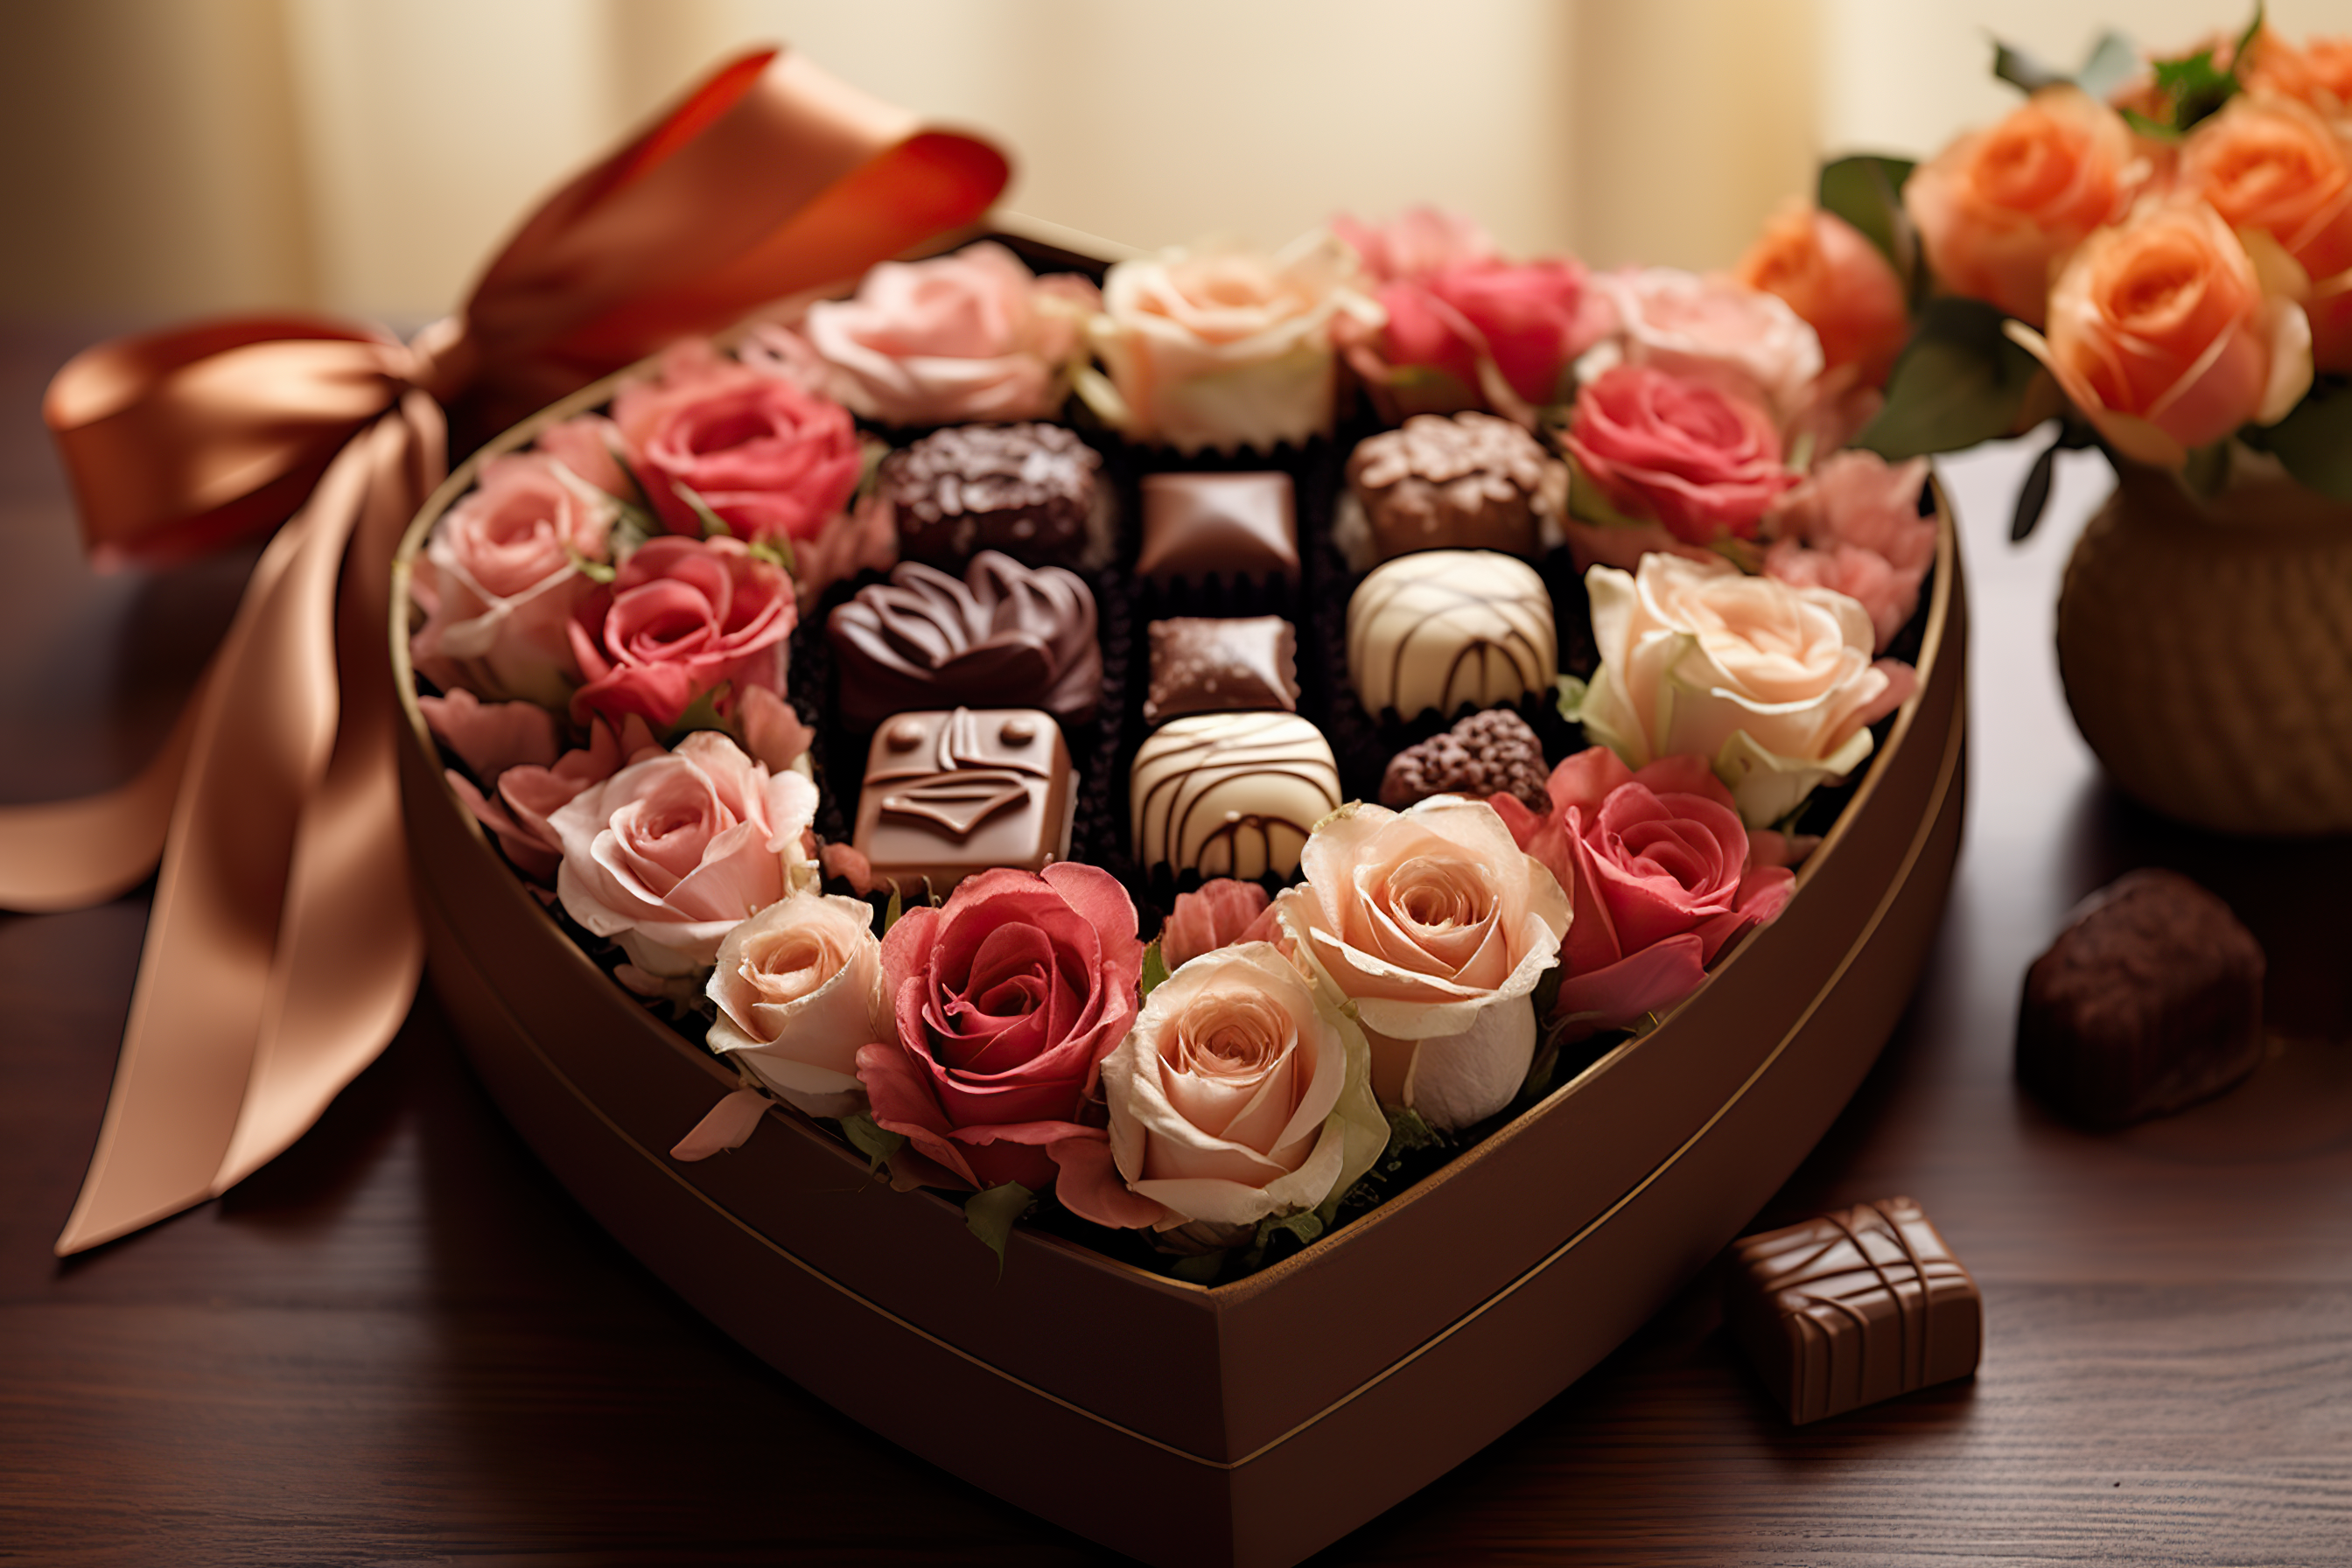 Rose bouquet of flowers and heart shape chocolate box